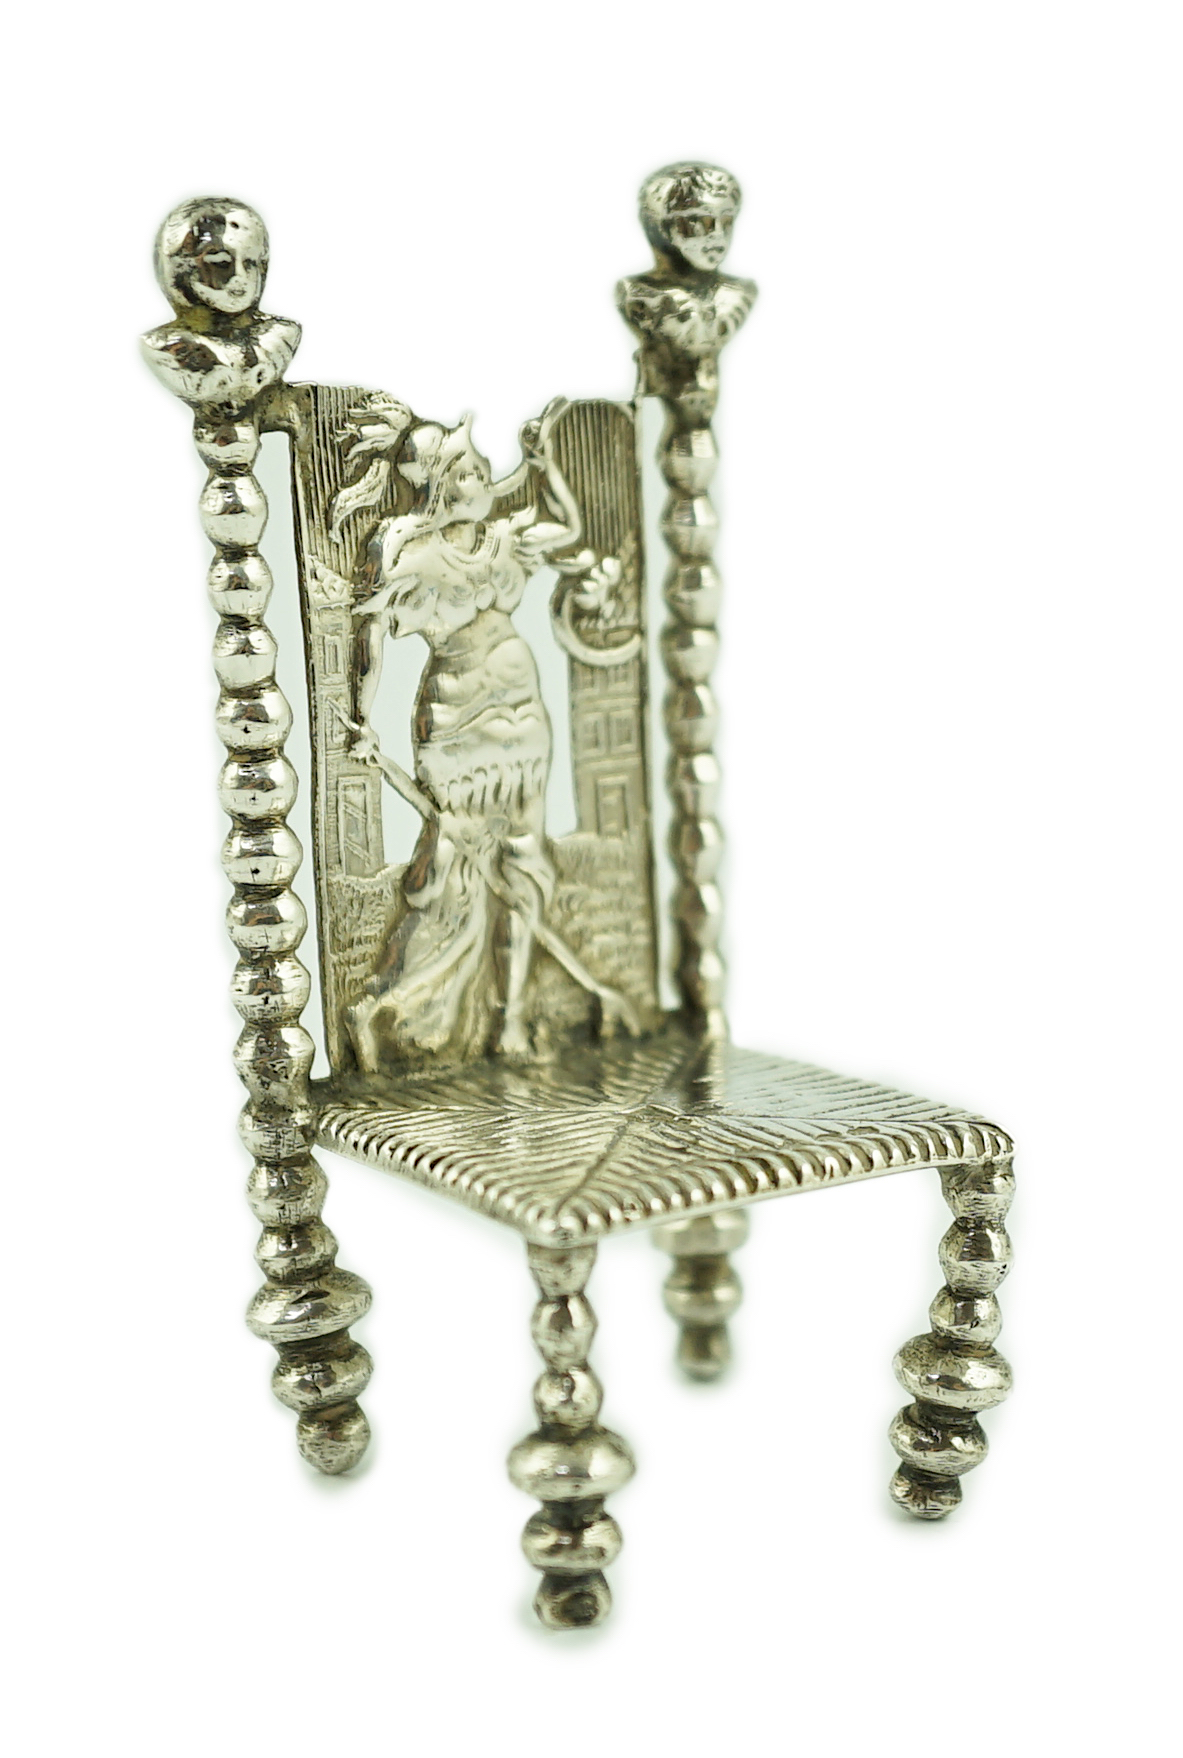 A late 19th century Dutch silver miniature model of a high back chair, import marks for B.H. Joseph & Co